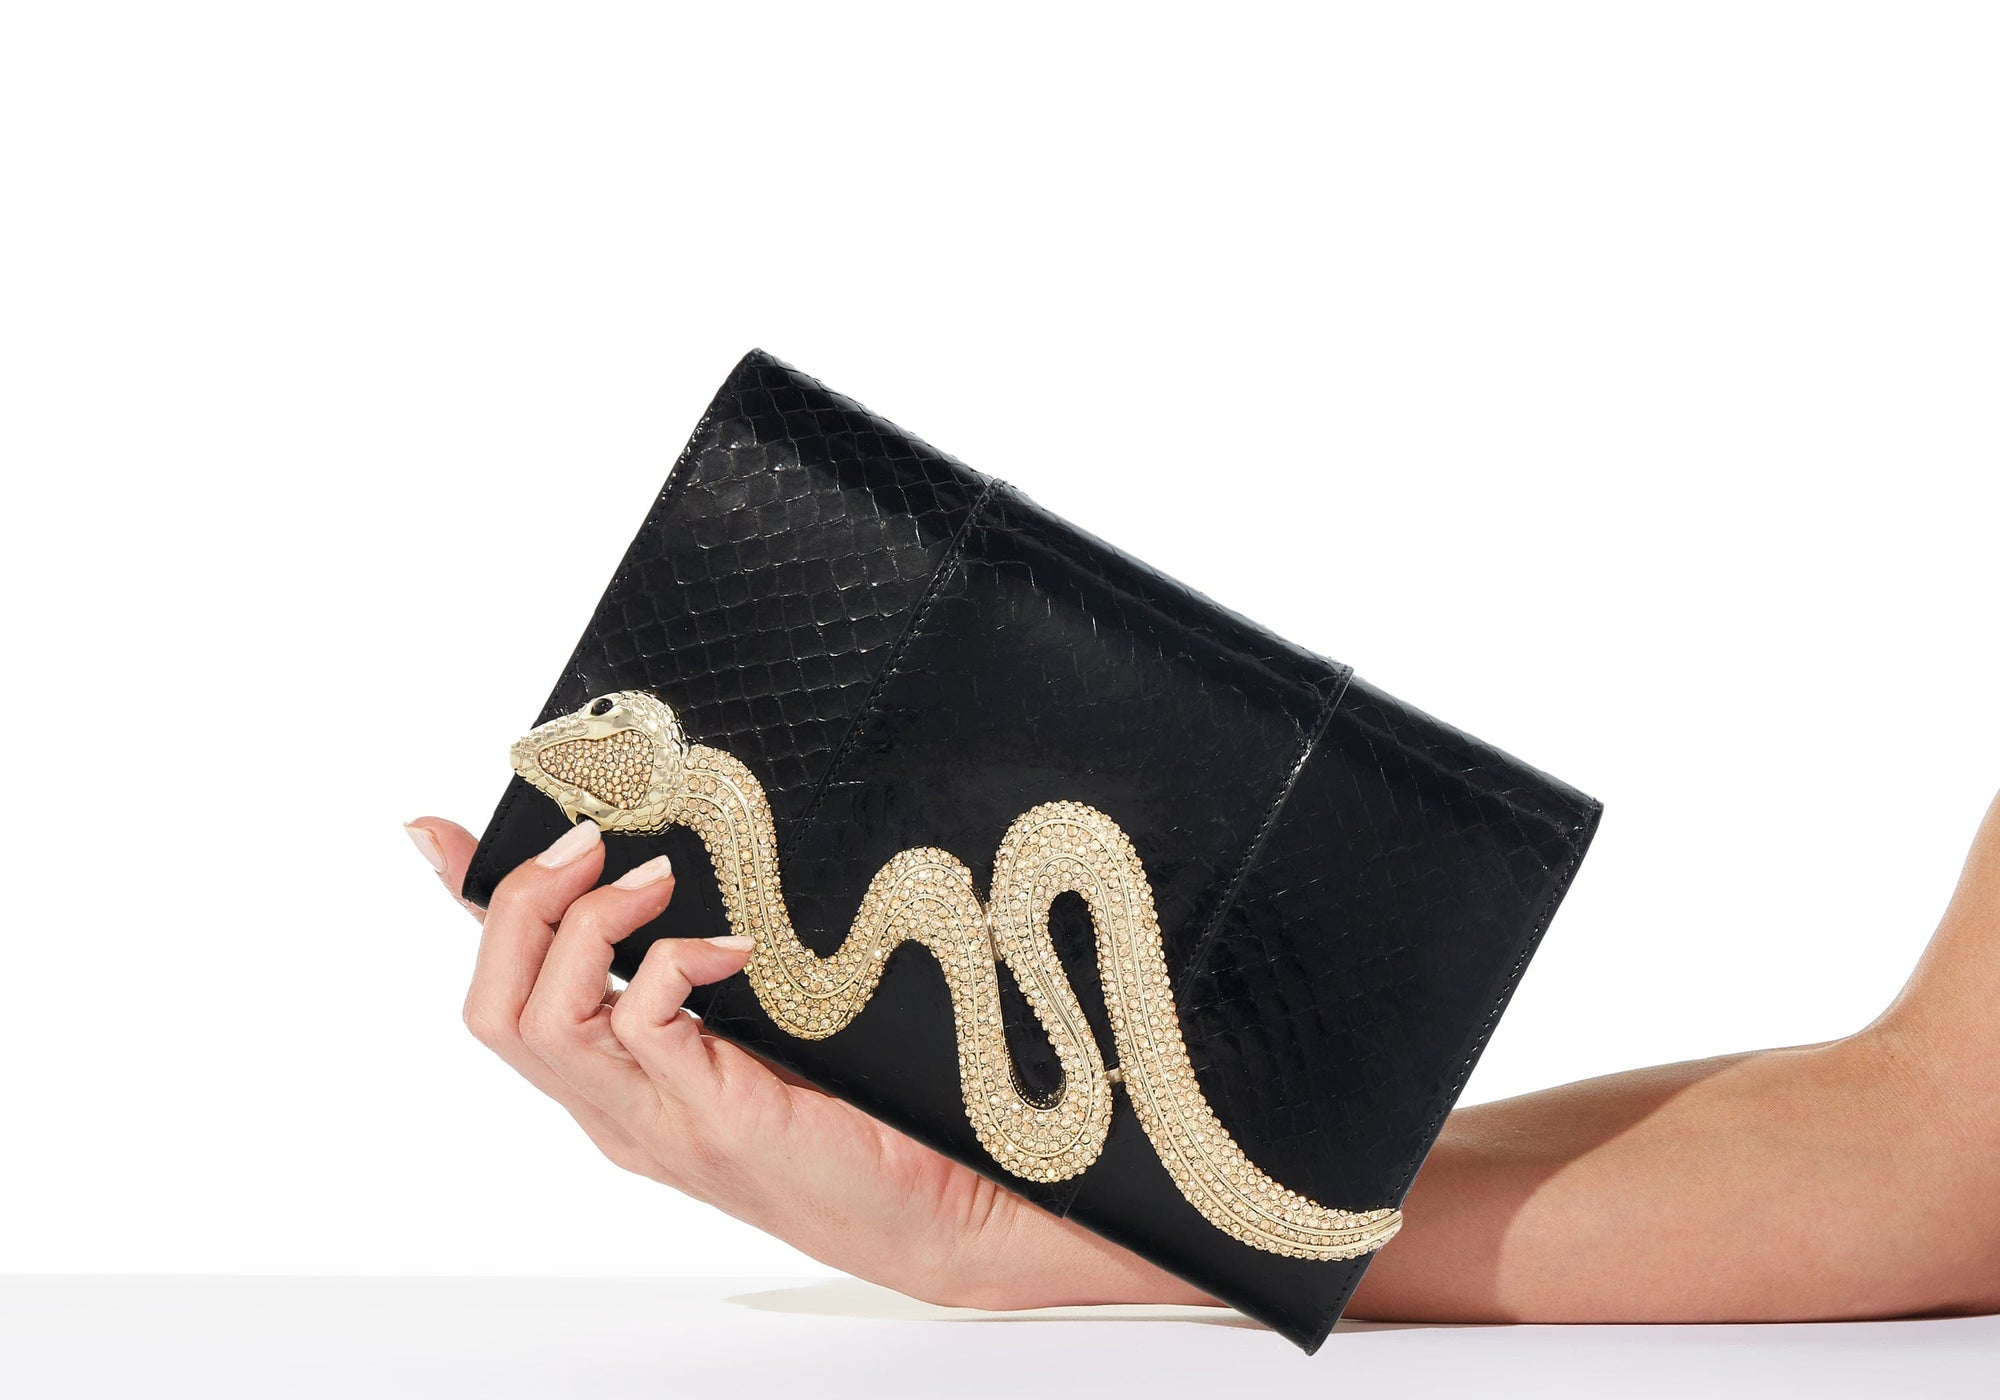 6 Judith Leiber Bags That Epitomize Her Unadulterated Love Of